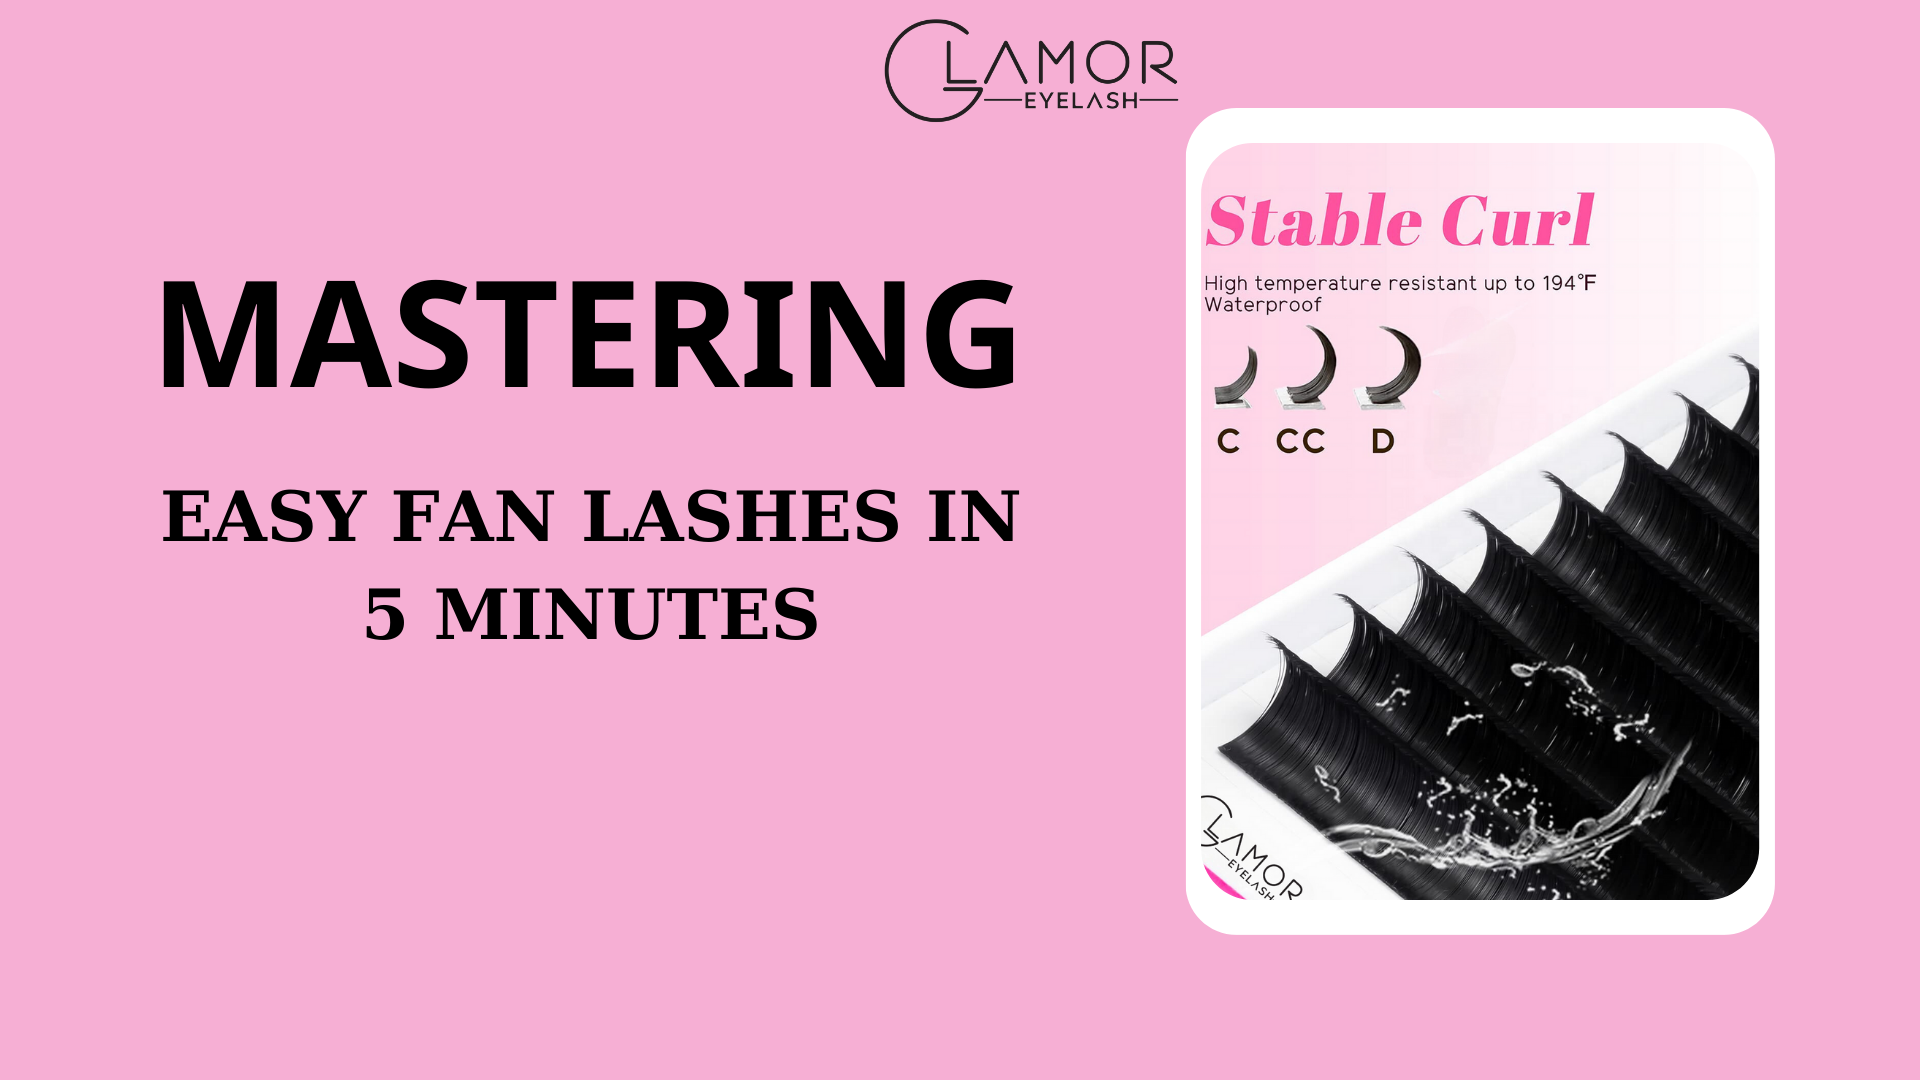 MASTERING EASY FAN LASHES IN 5 MINUTES